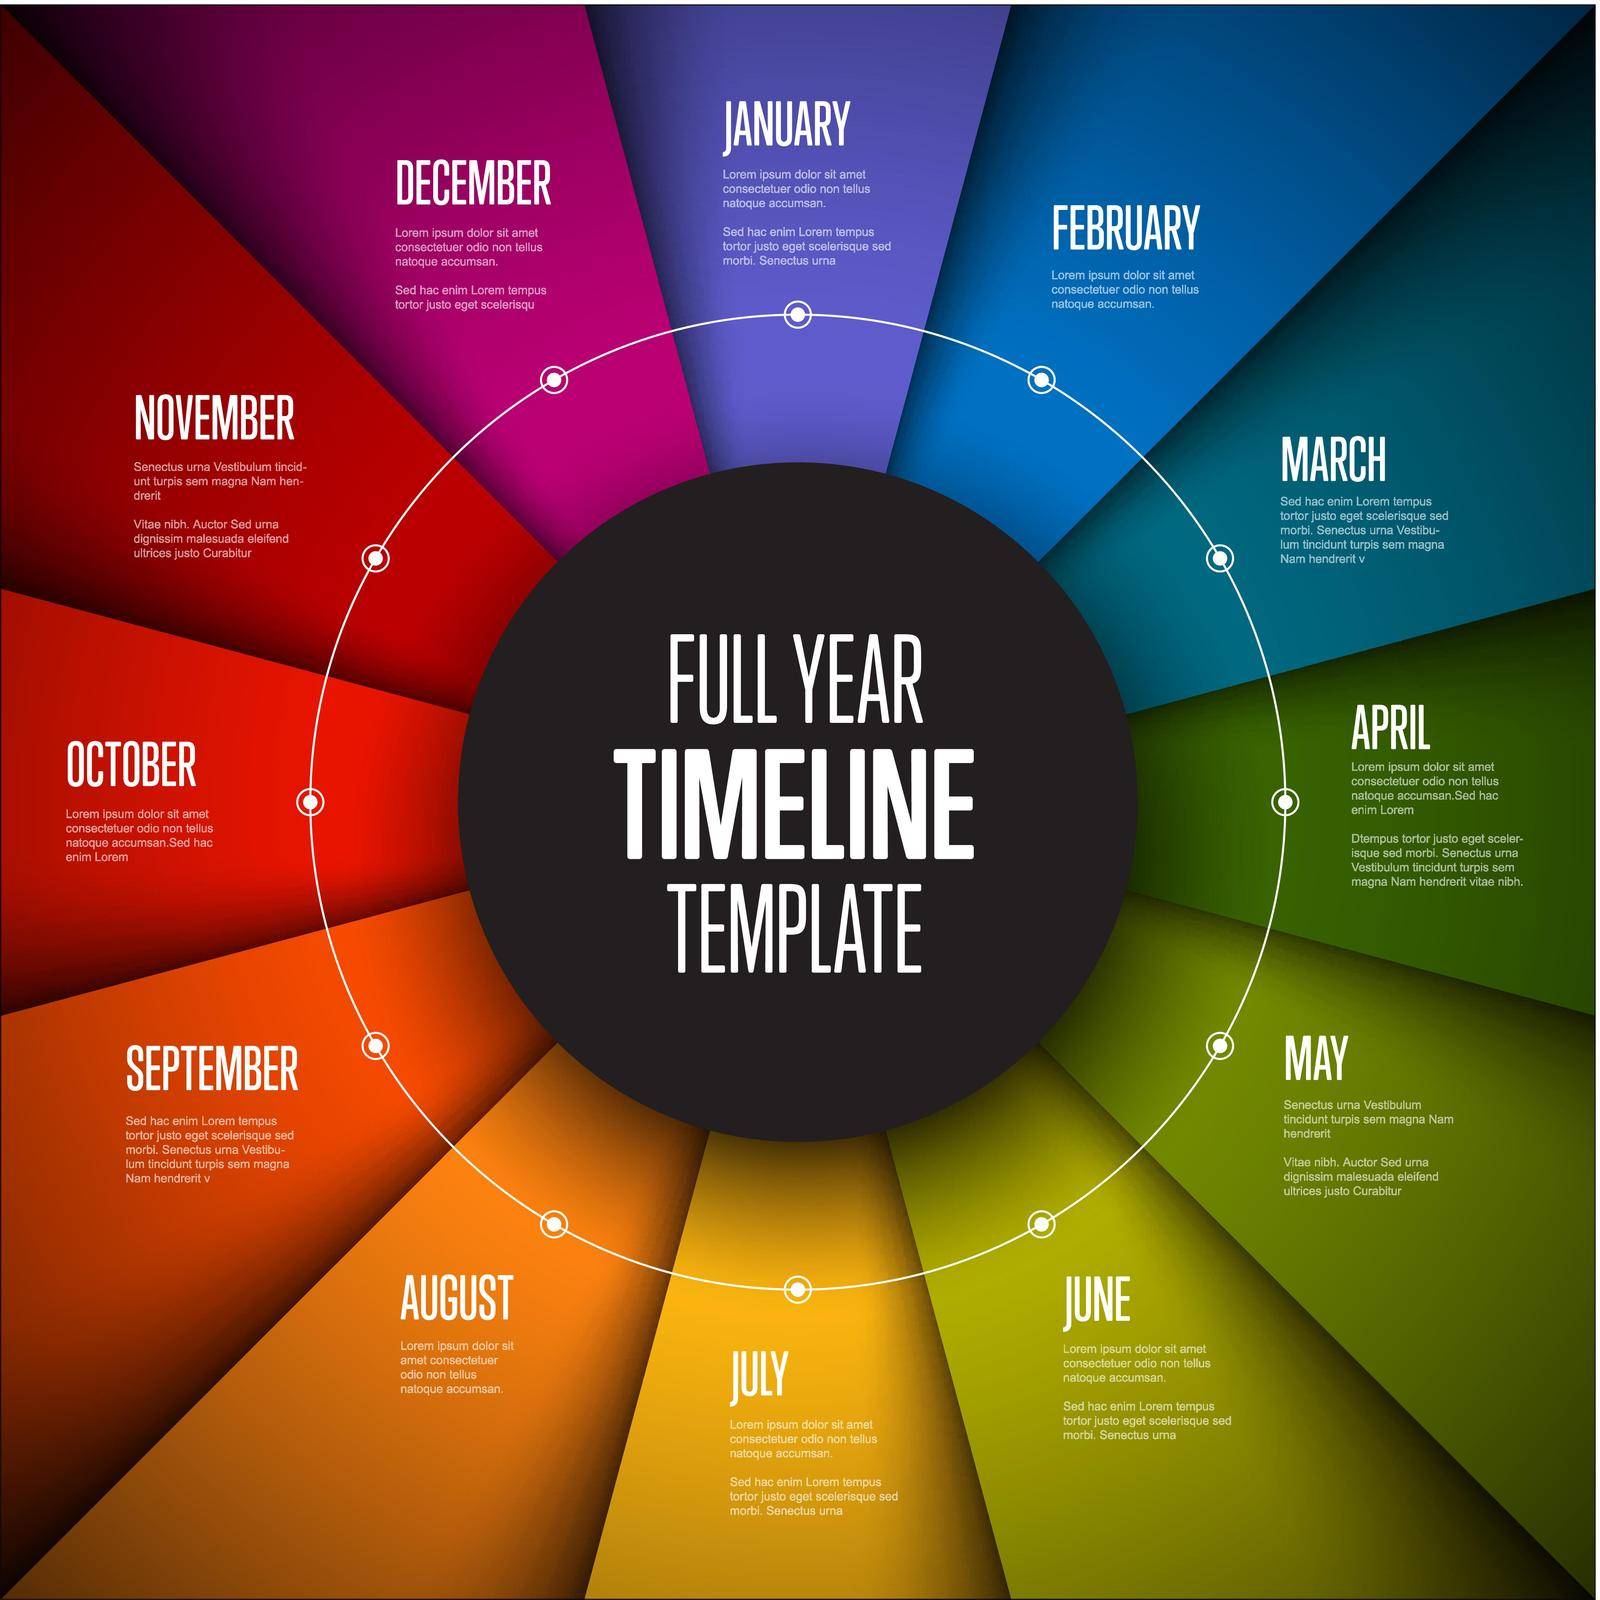 Infographic full year timeline template by orson